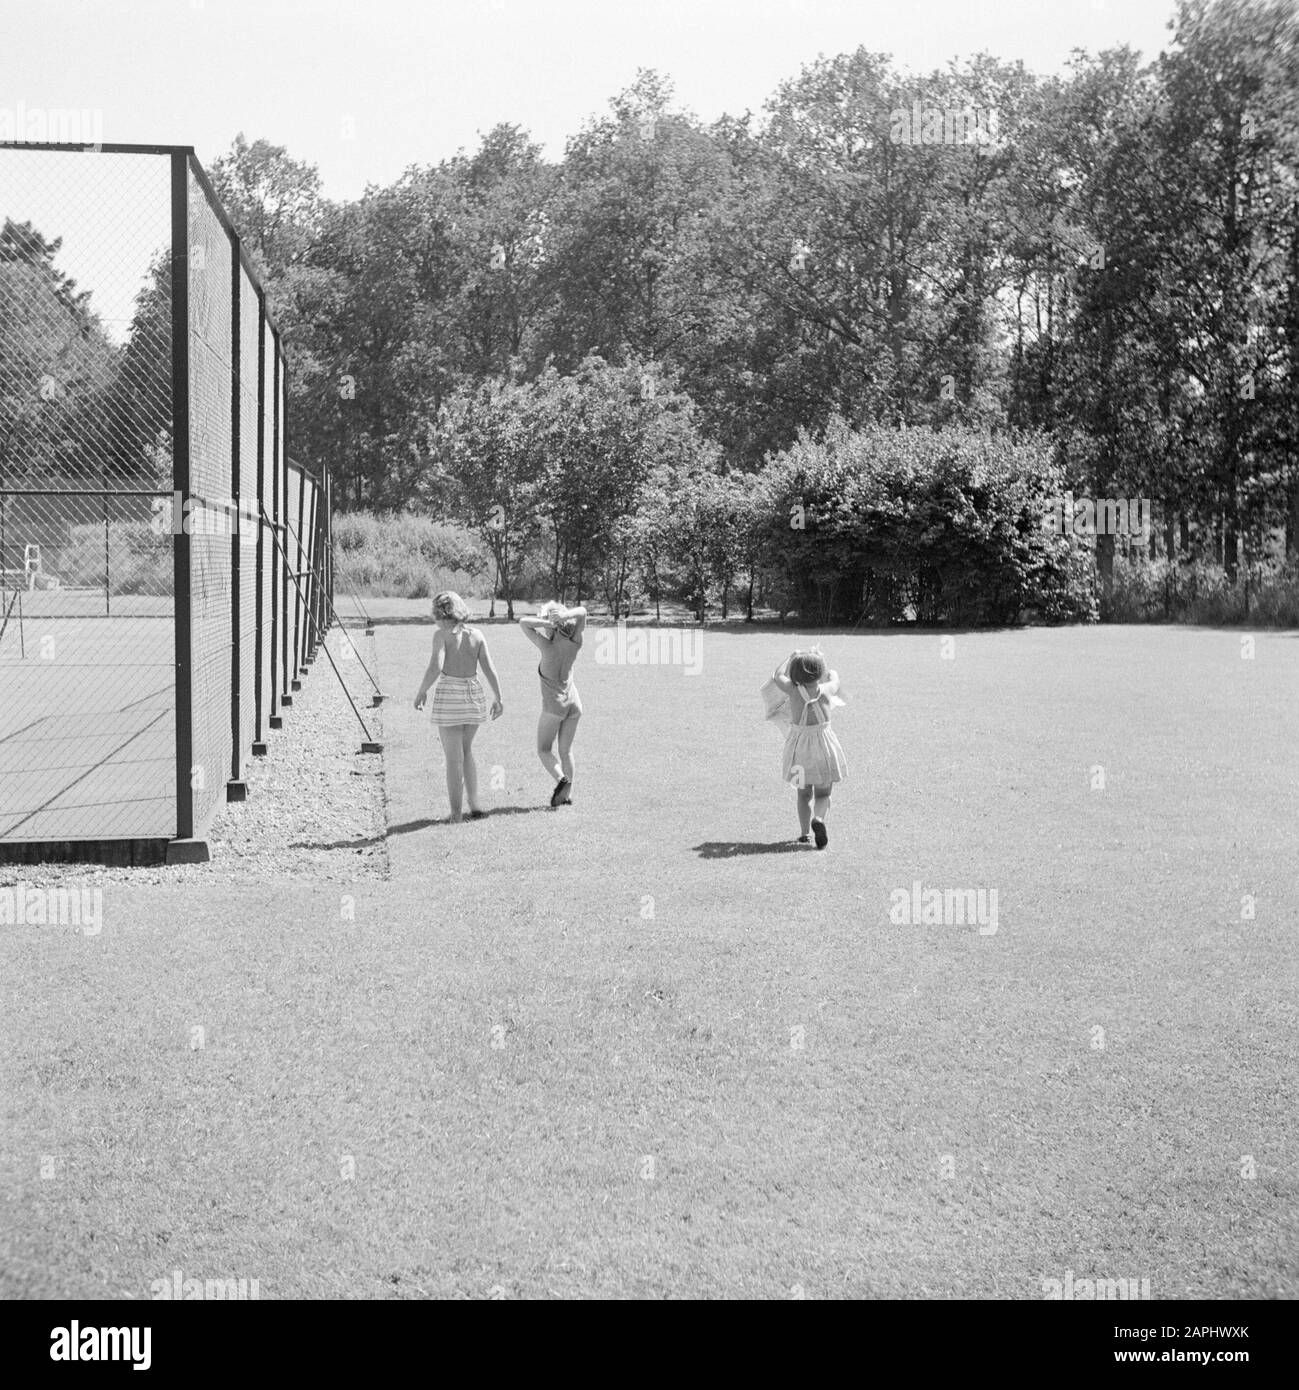 Tennis palace Black and White Stock Photos & Images - Alamy